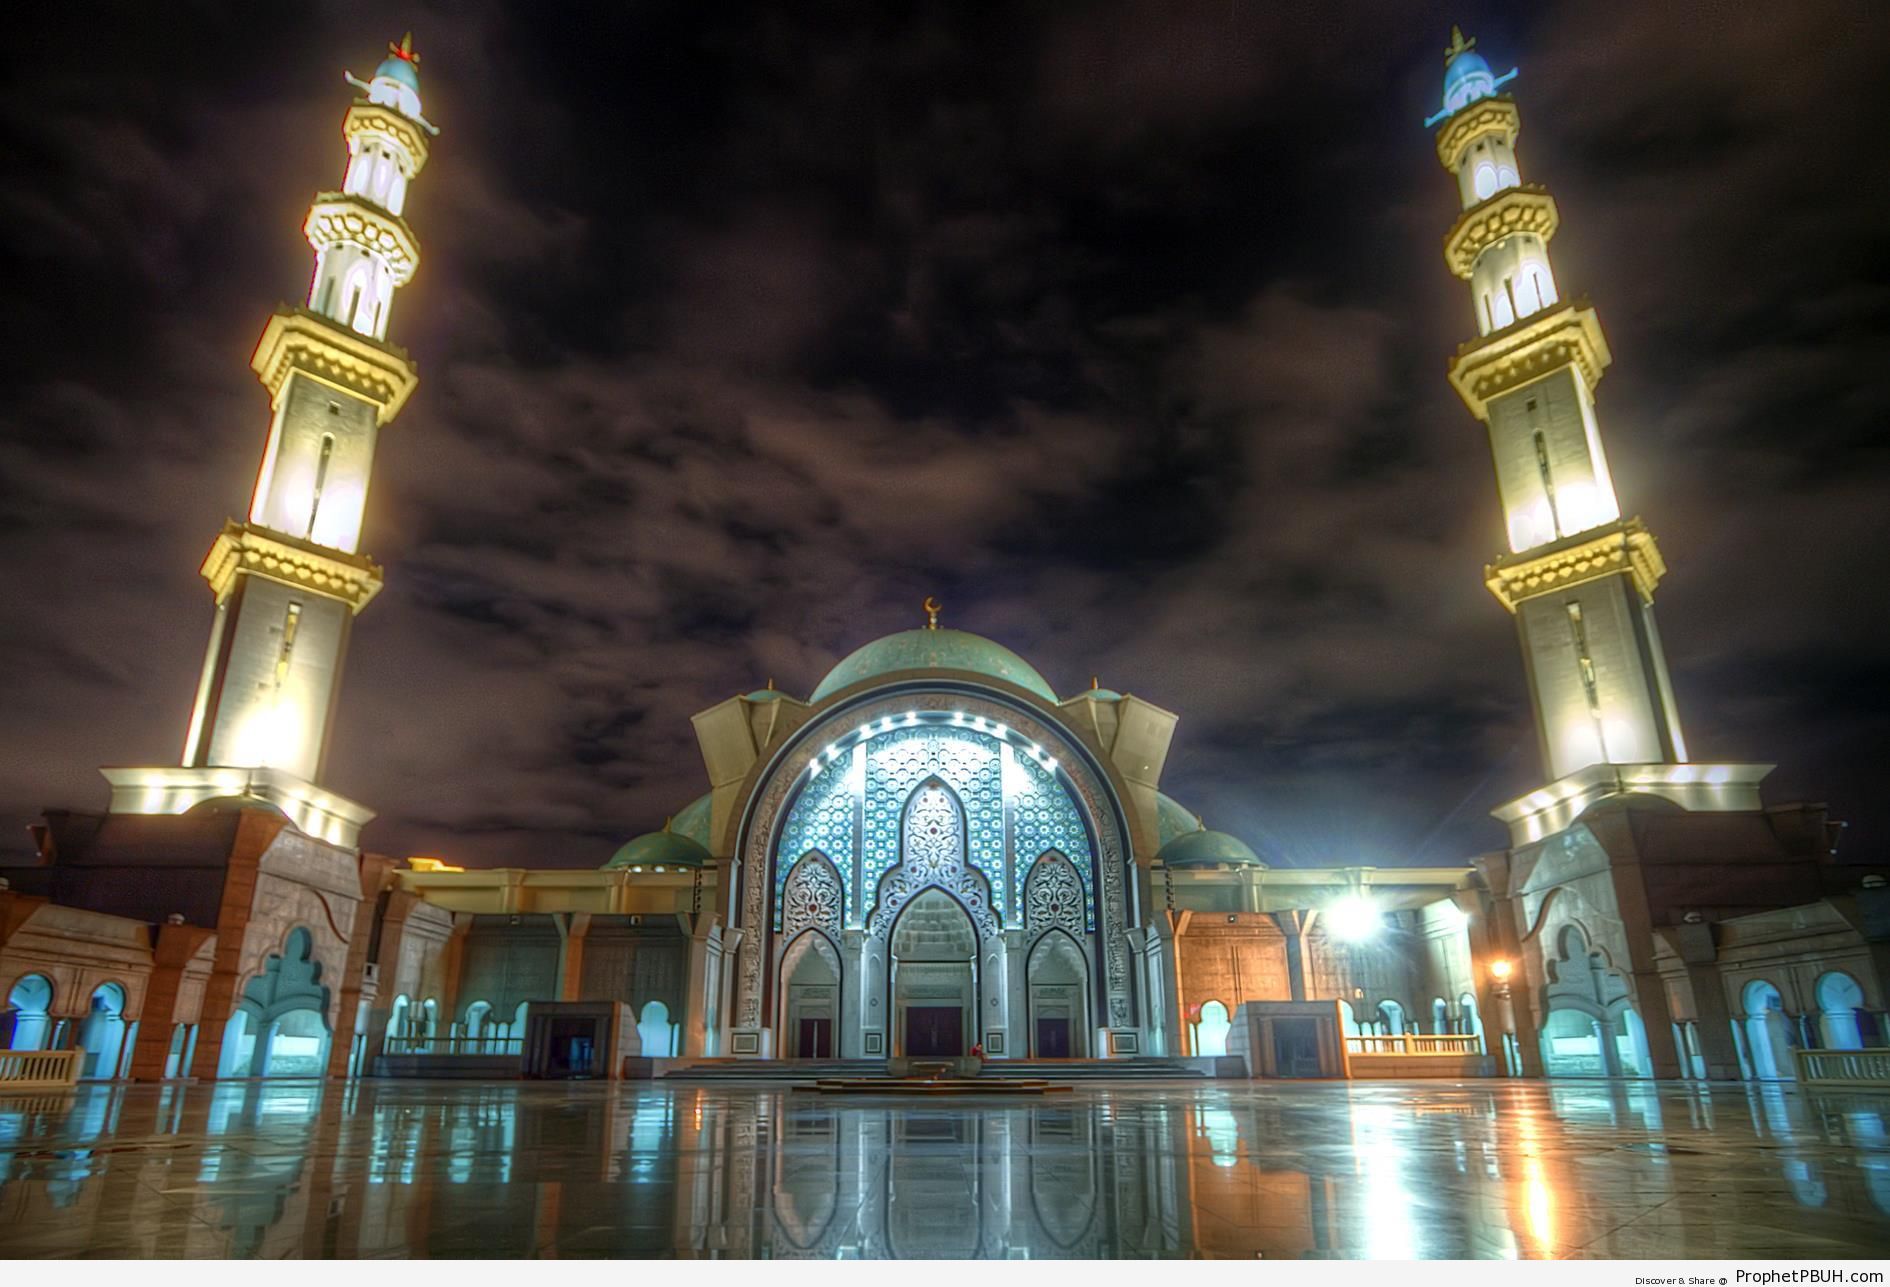 HDR Night Shot of Masjid Wilayah in Kuala Lampur, Malaysia - Islamic Architecture -Picture